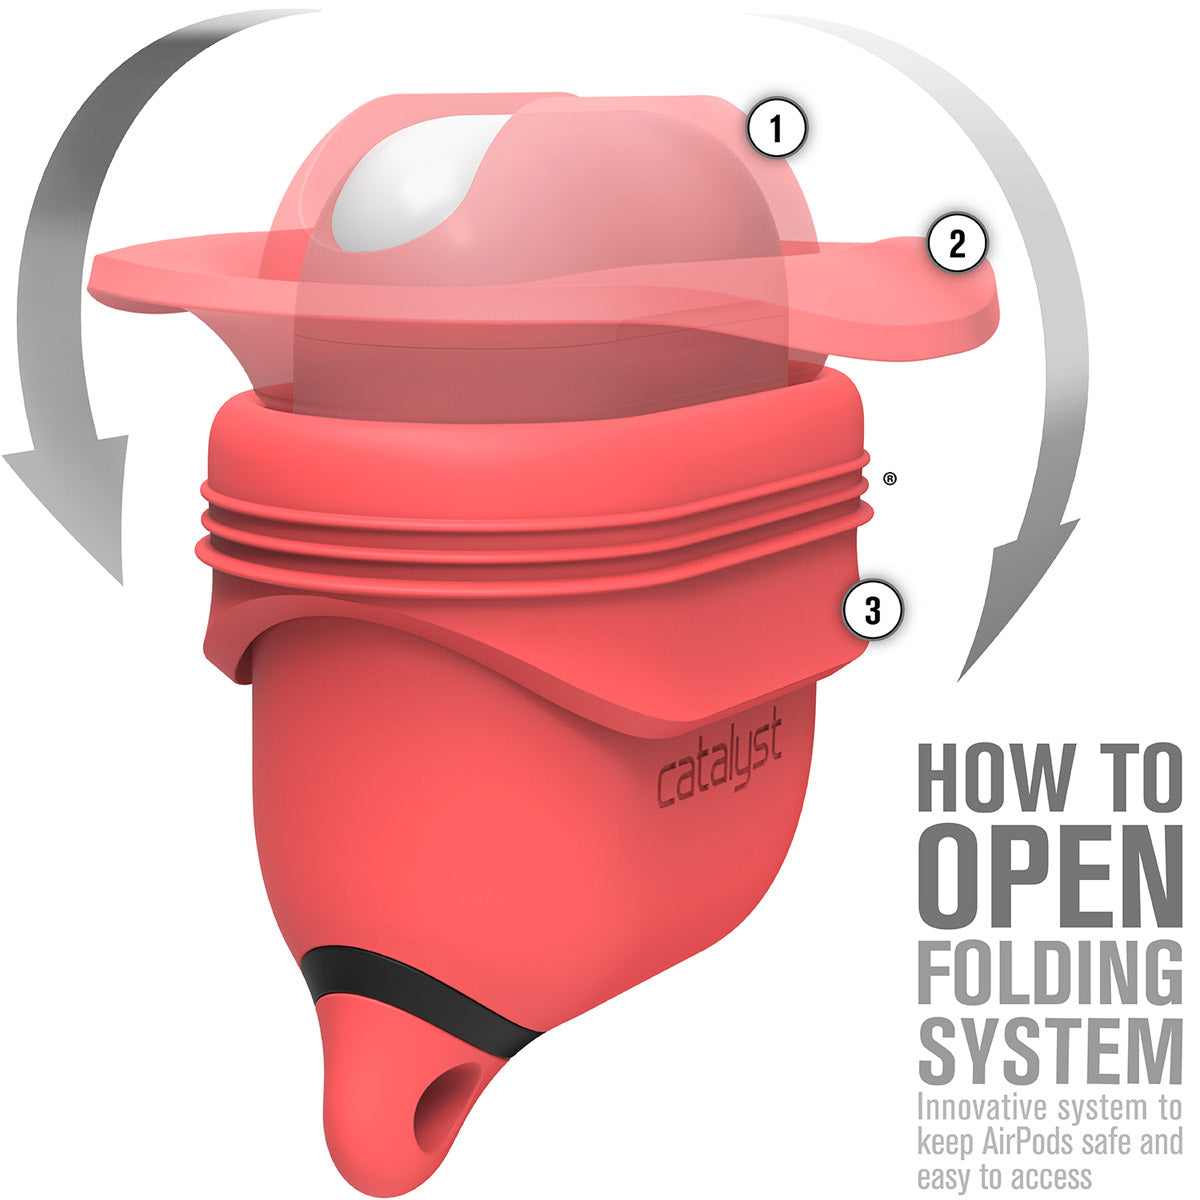 Catalyst airpods gen2/1 waterproof case + carabiner showing the-foldable silicone in coral text reads how to open folding system innovative system to keep airpods safe and easy to access